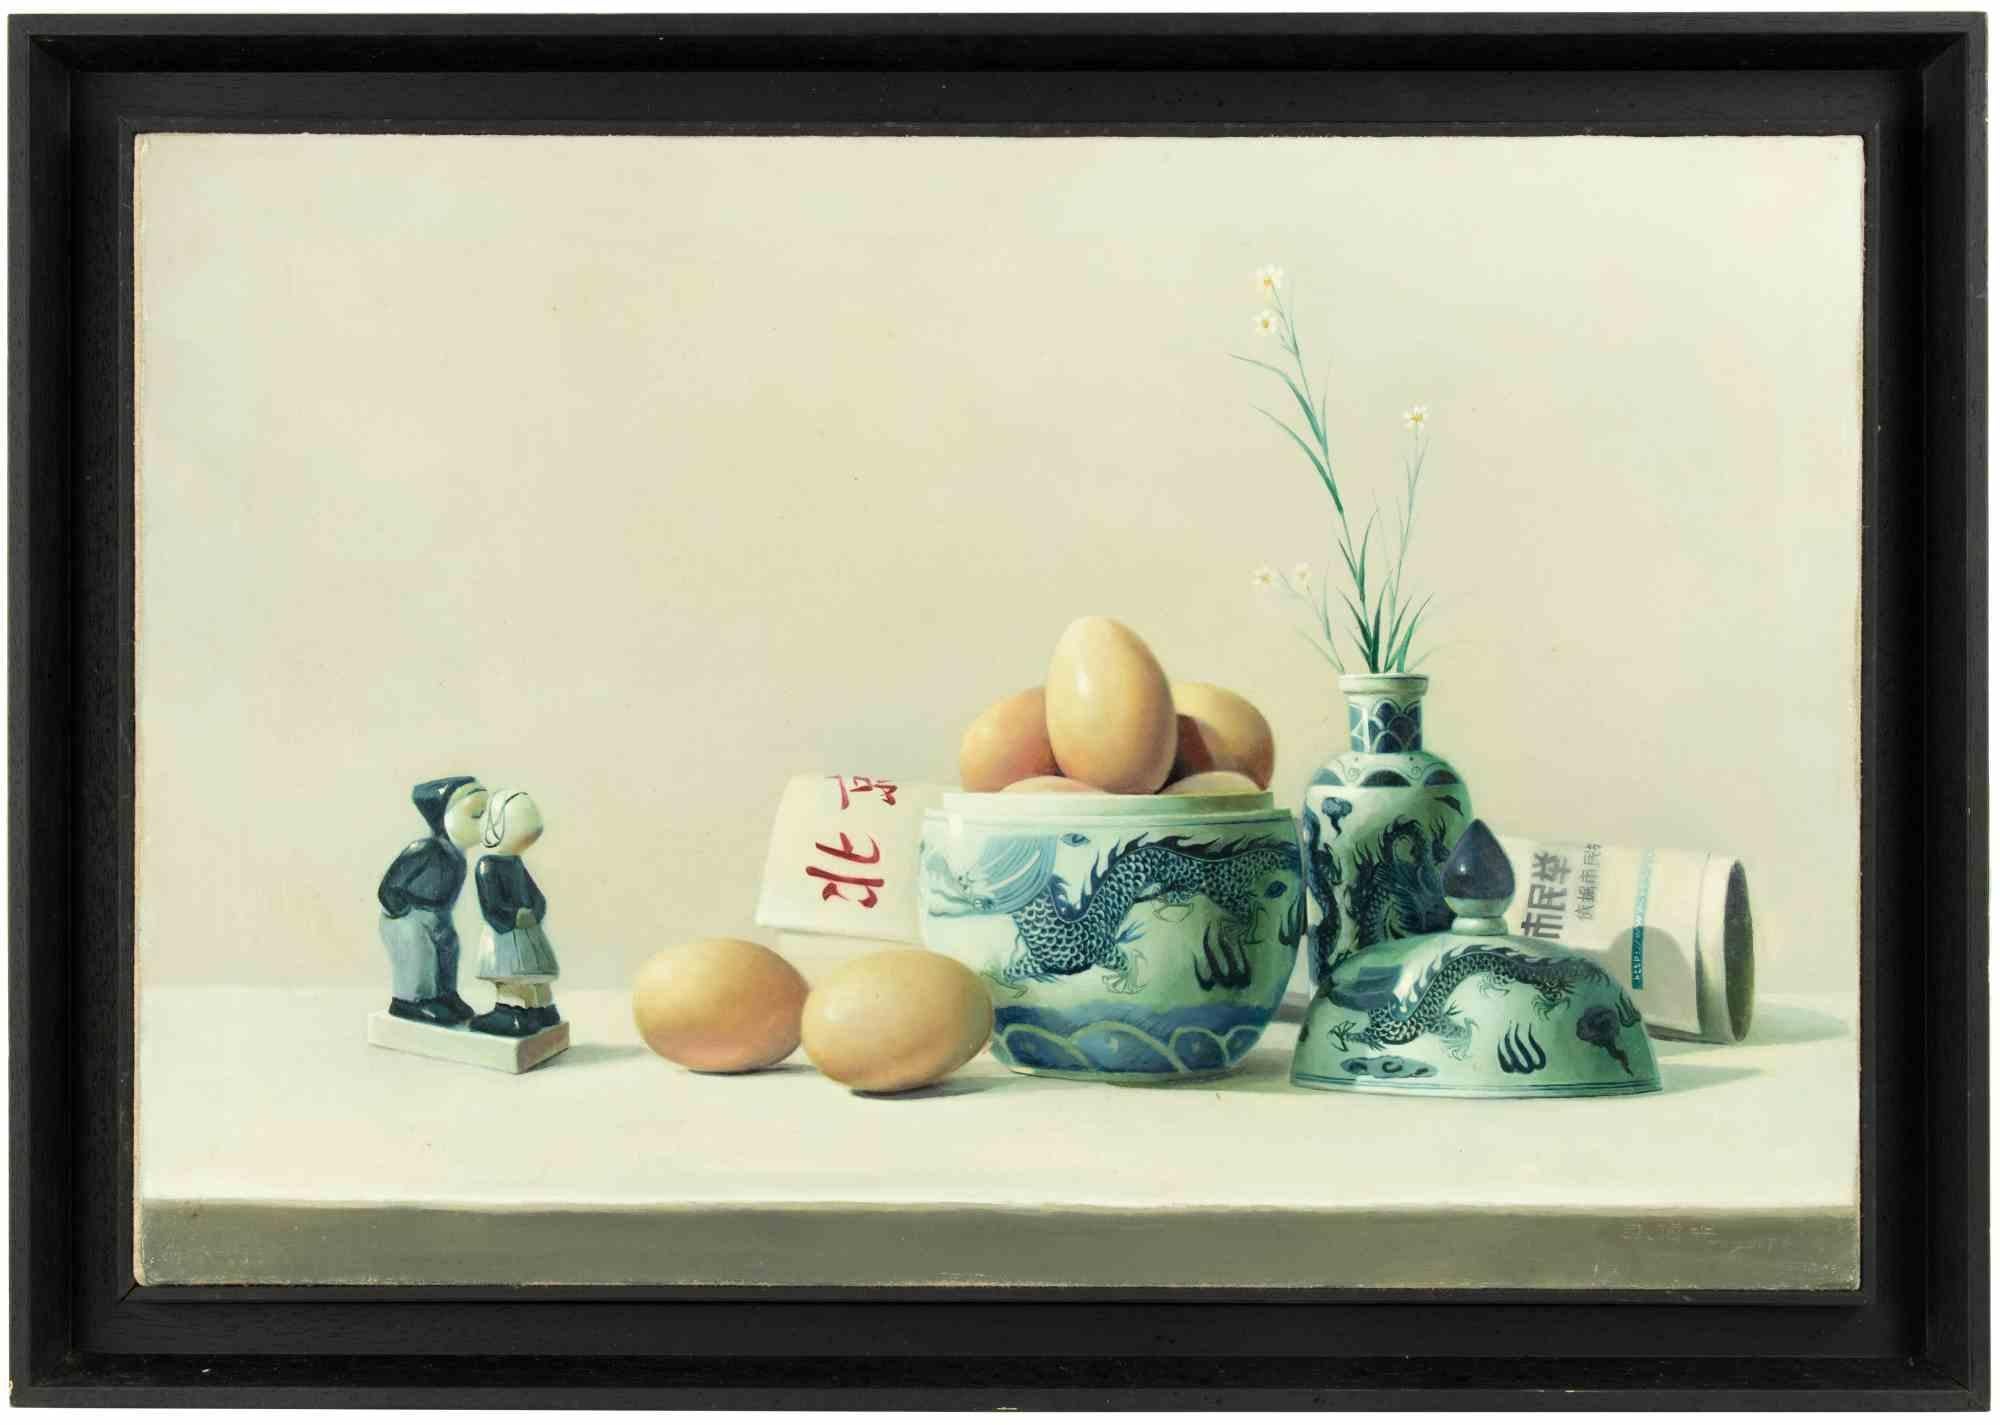 Breakfast is an oil painting realized  by Zhang Wei Guang (Mirror) in 2000s.

Includes frame.

Signature and various signs in Chinese calligraphy on the back.

Very Good conditions.

Zhang Wei Guang , also called ‘mirror' was born in Helong Jang,